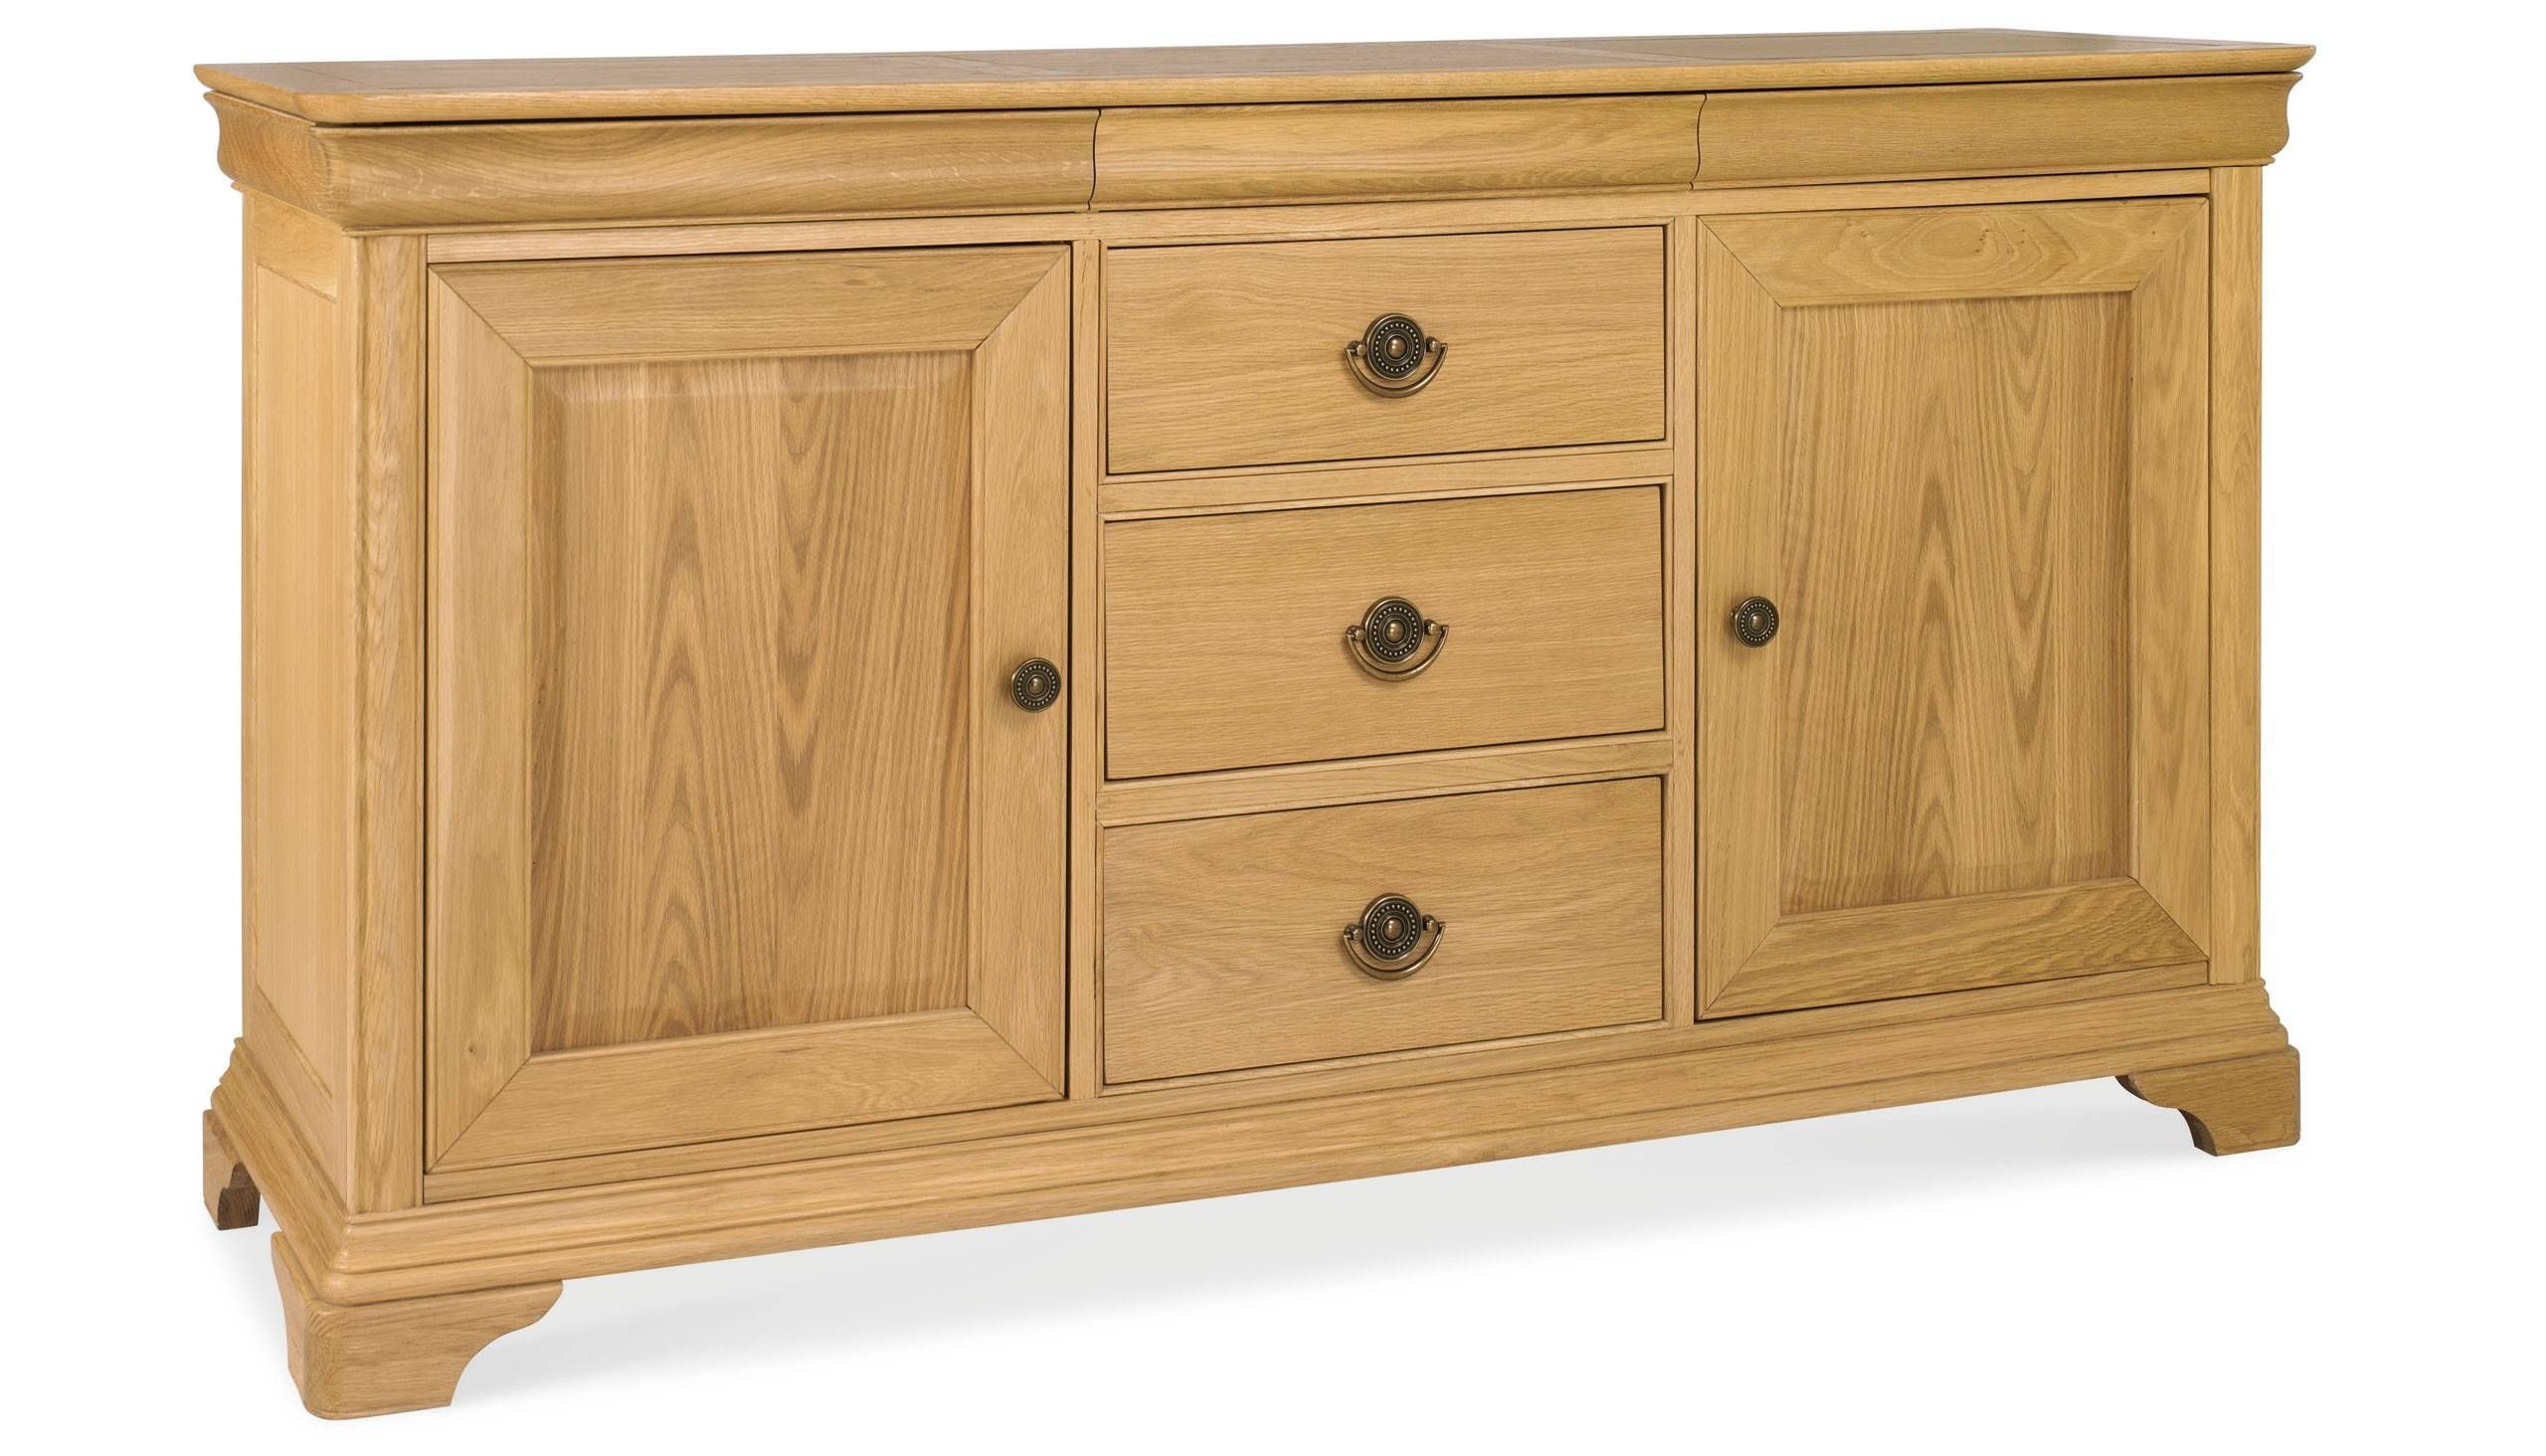 Wide Sideboard From The Chantilly Oak Range | Ahf Furniture Within Oak Sideboards (View 25 of 30)